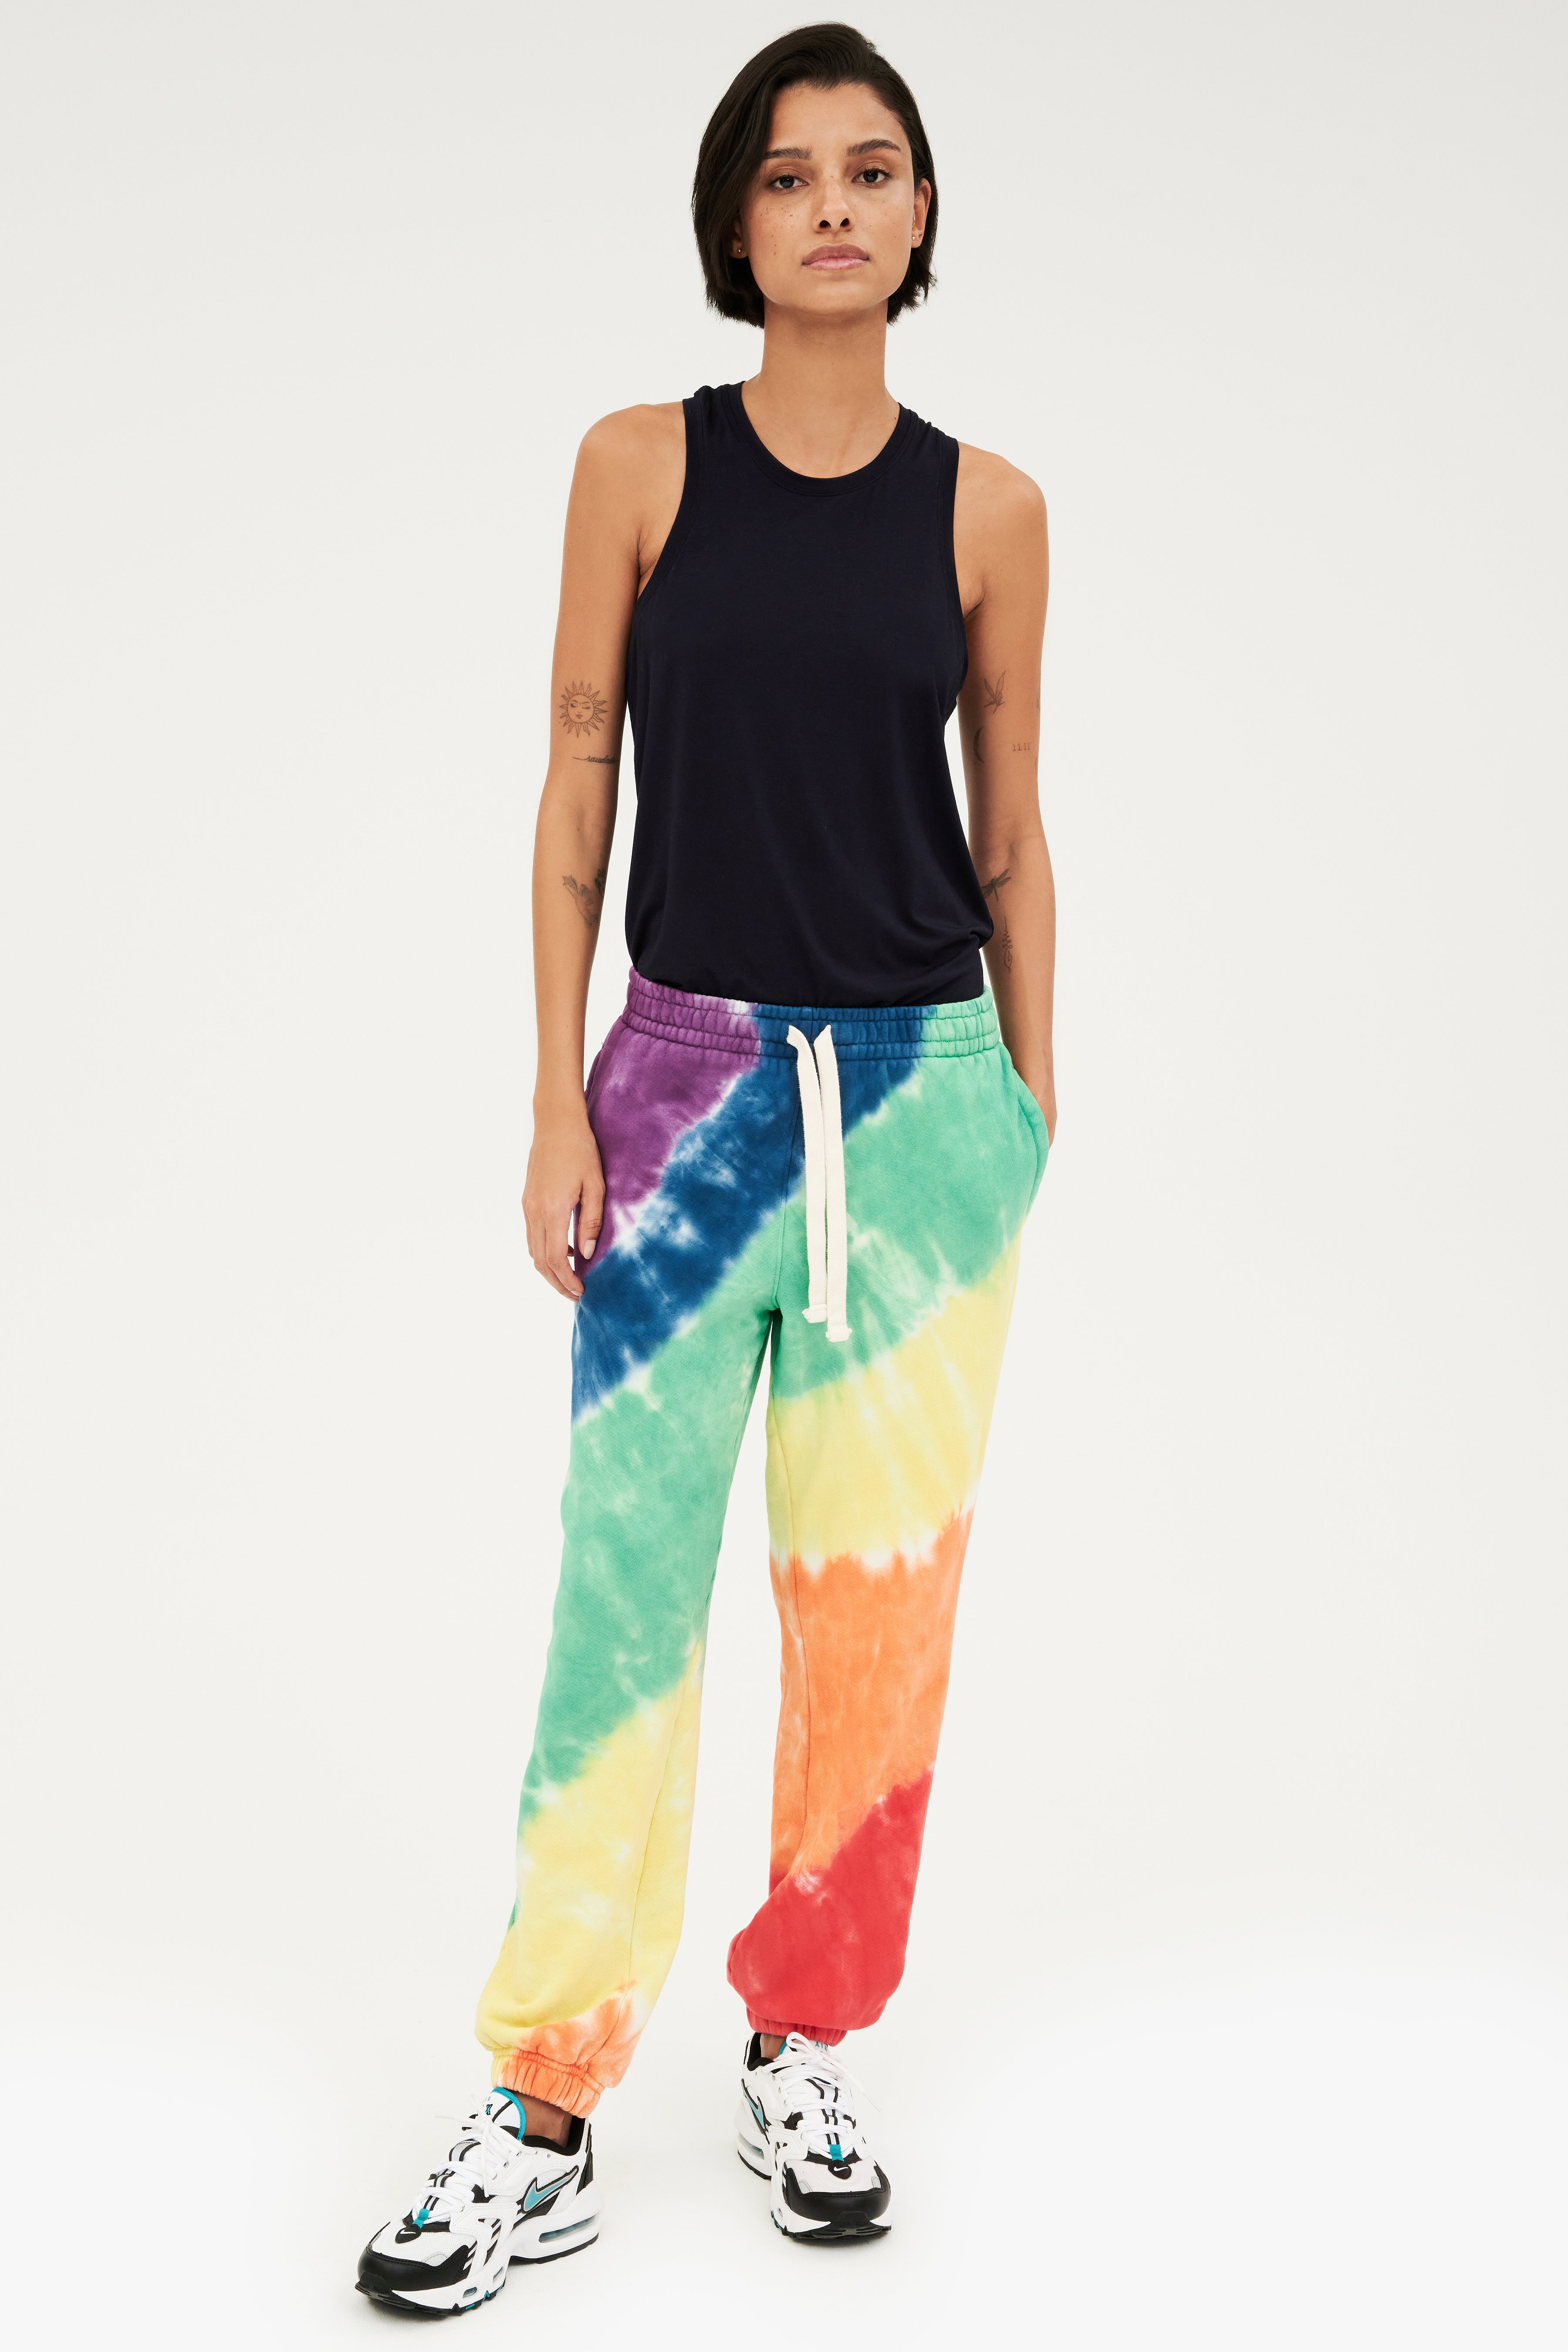 Caster Unisex French Terry Sweatpant - Washed Tie Dye | SPLITS59